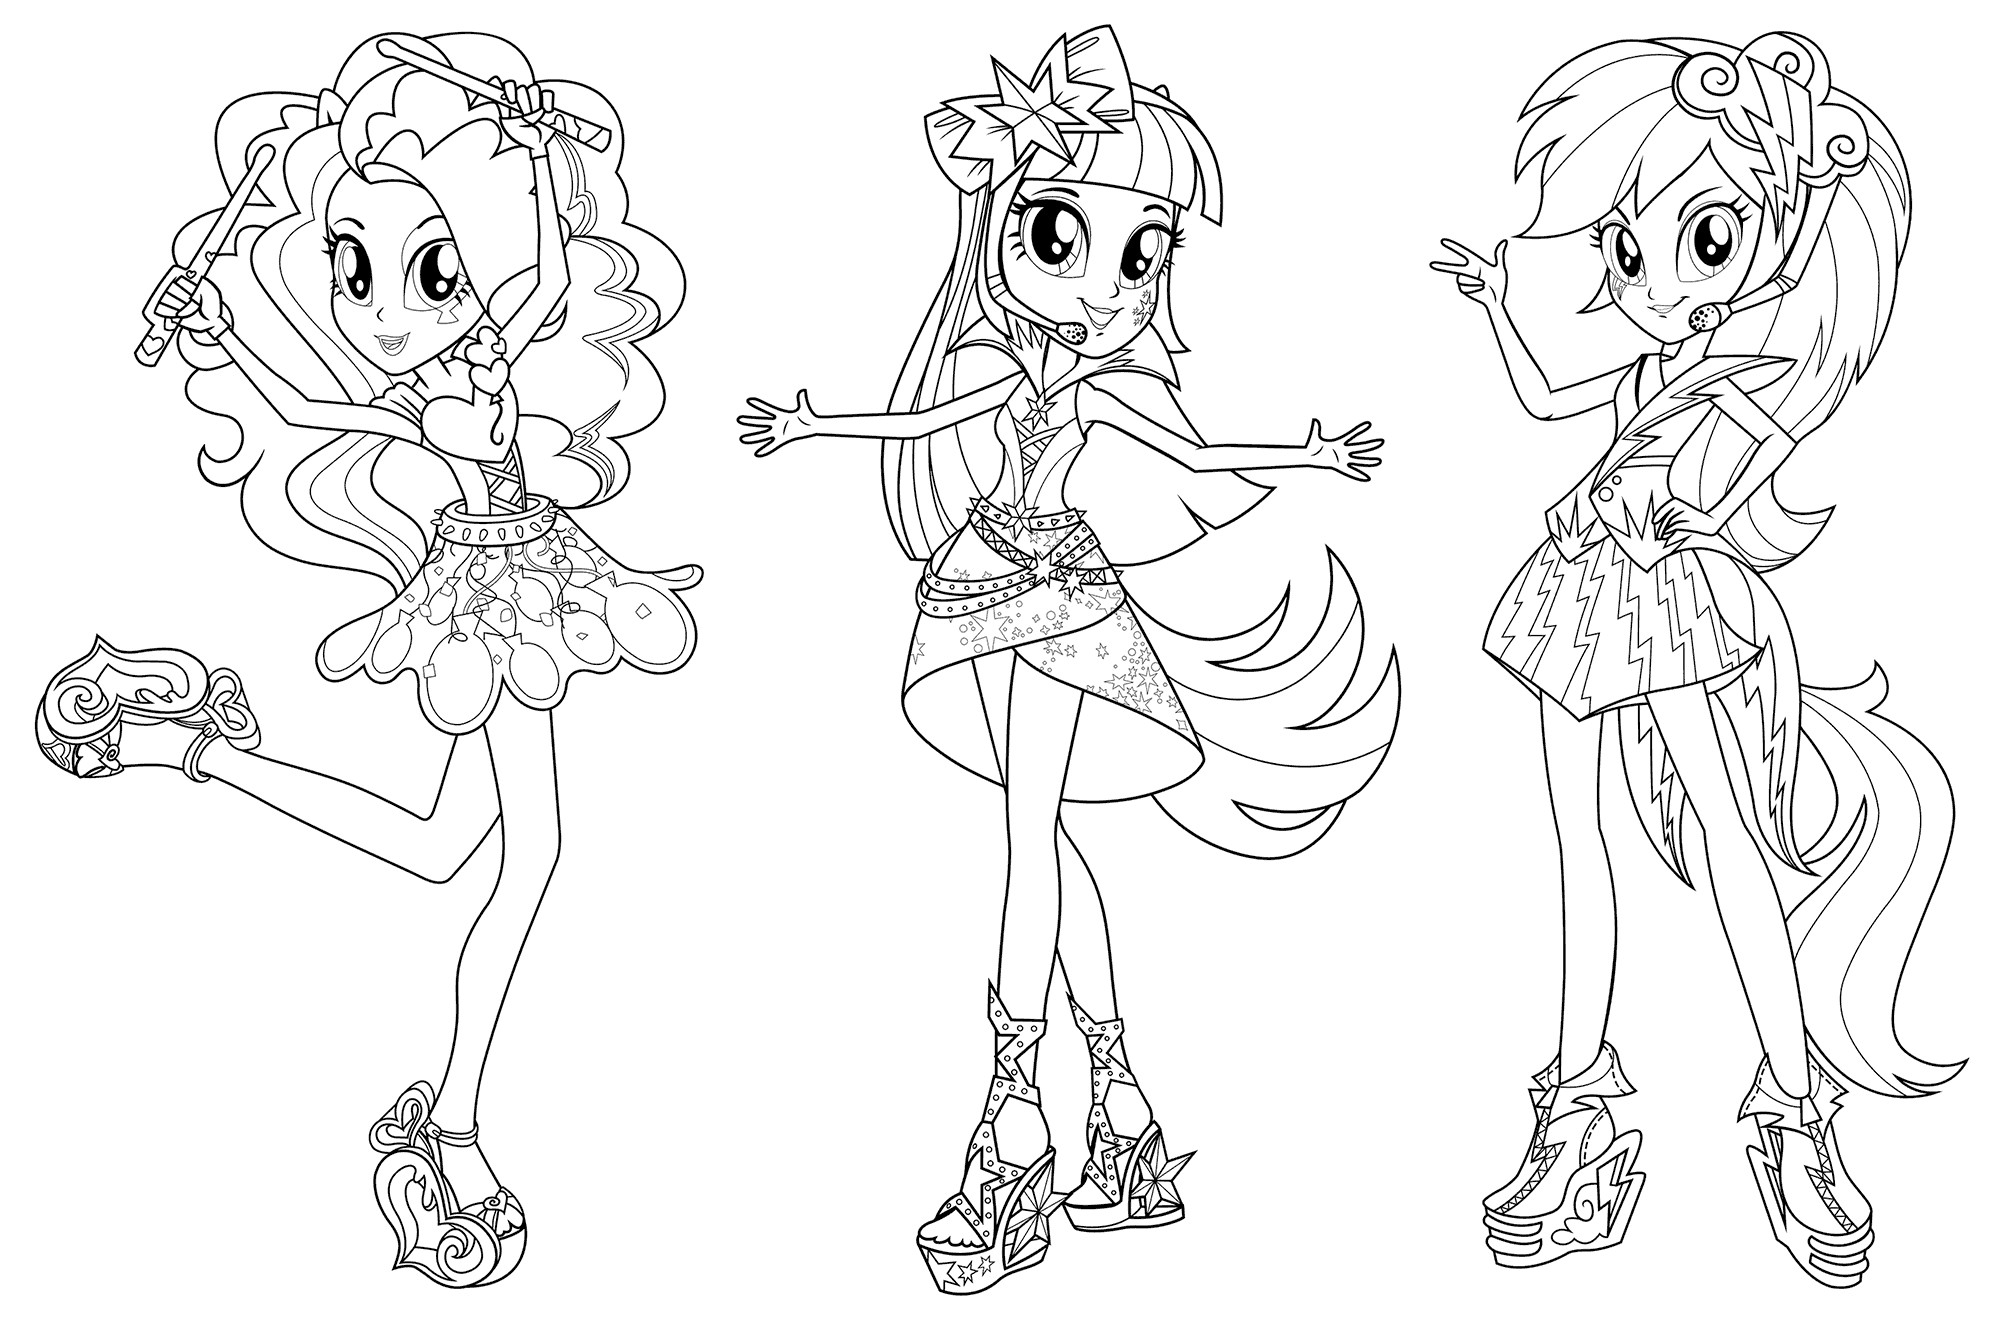 Coloring Sheets For Girls Mlp
 My Little Pony Equestria Girls Coloring Pages to Print